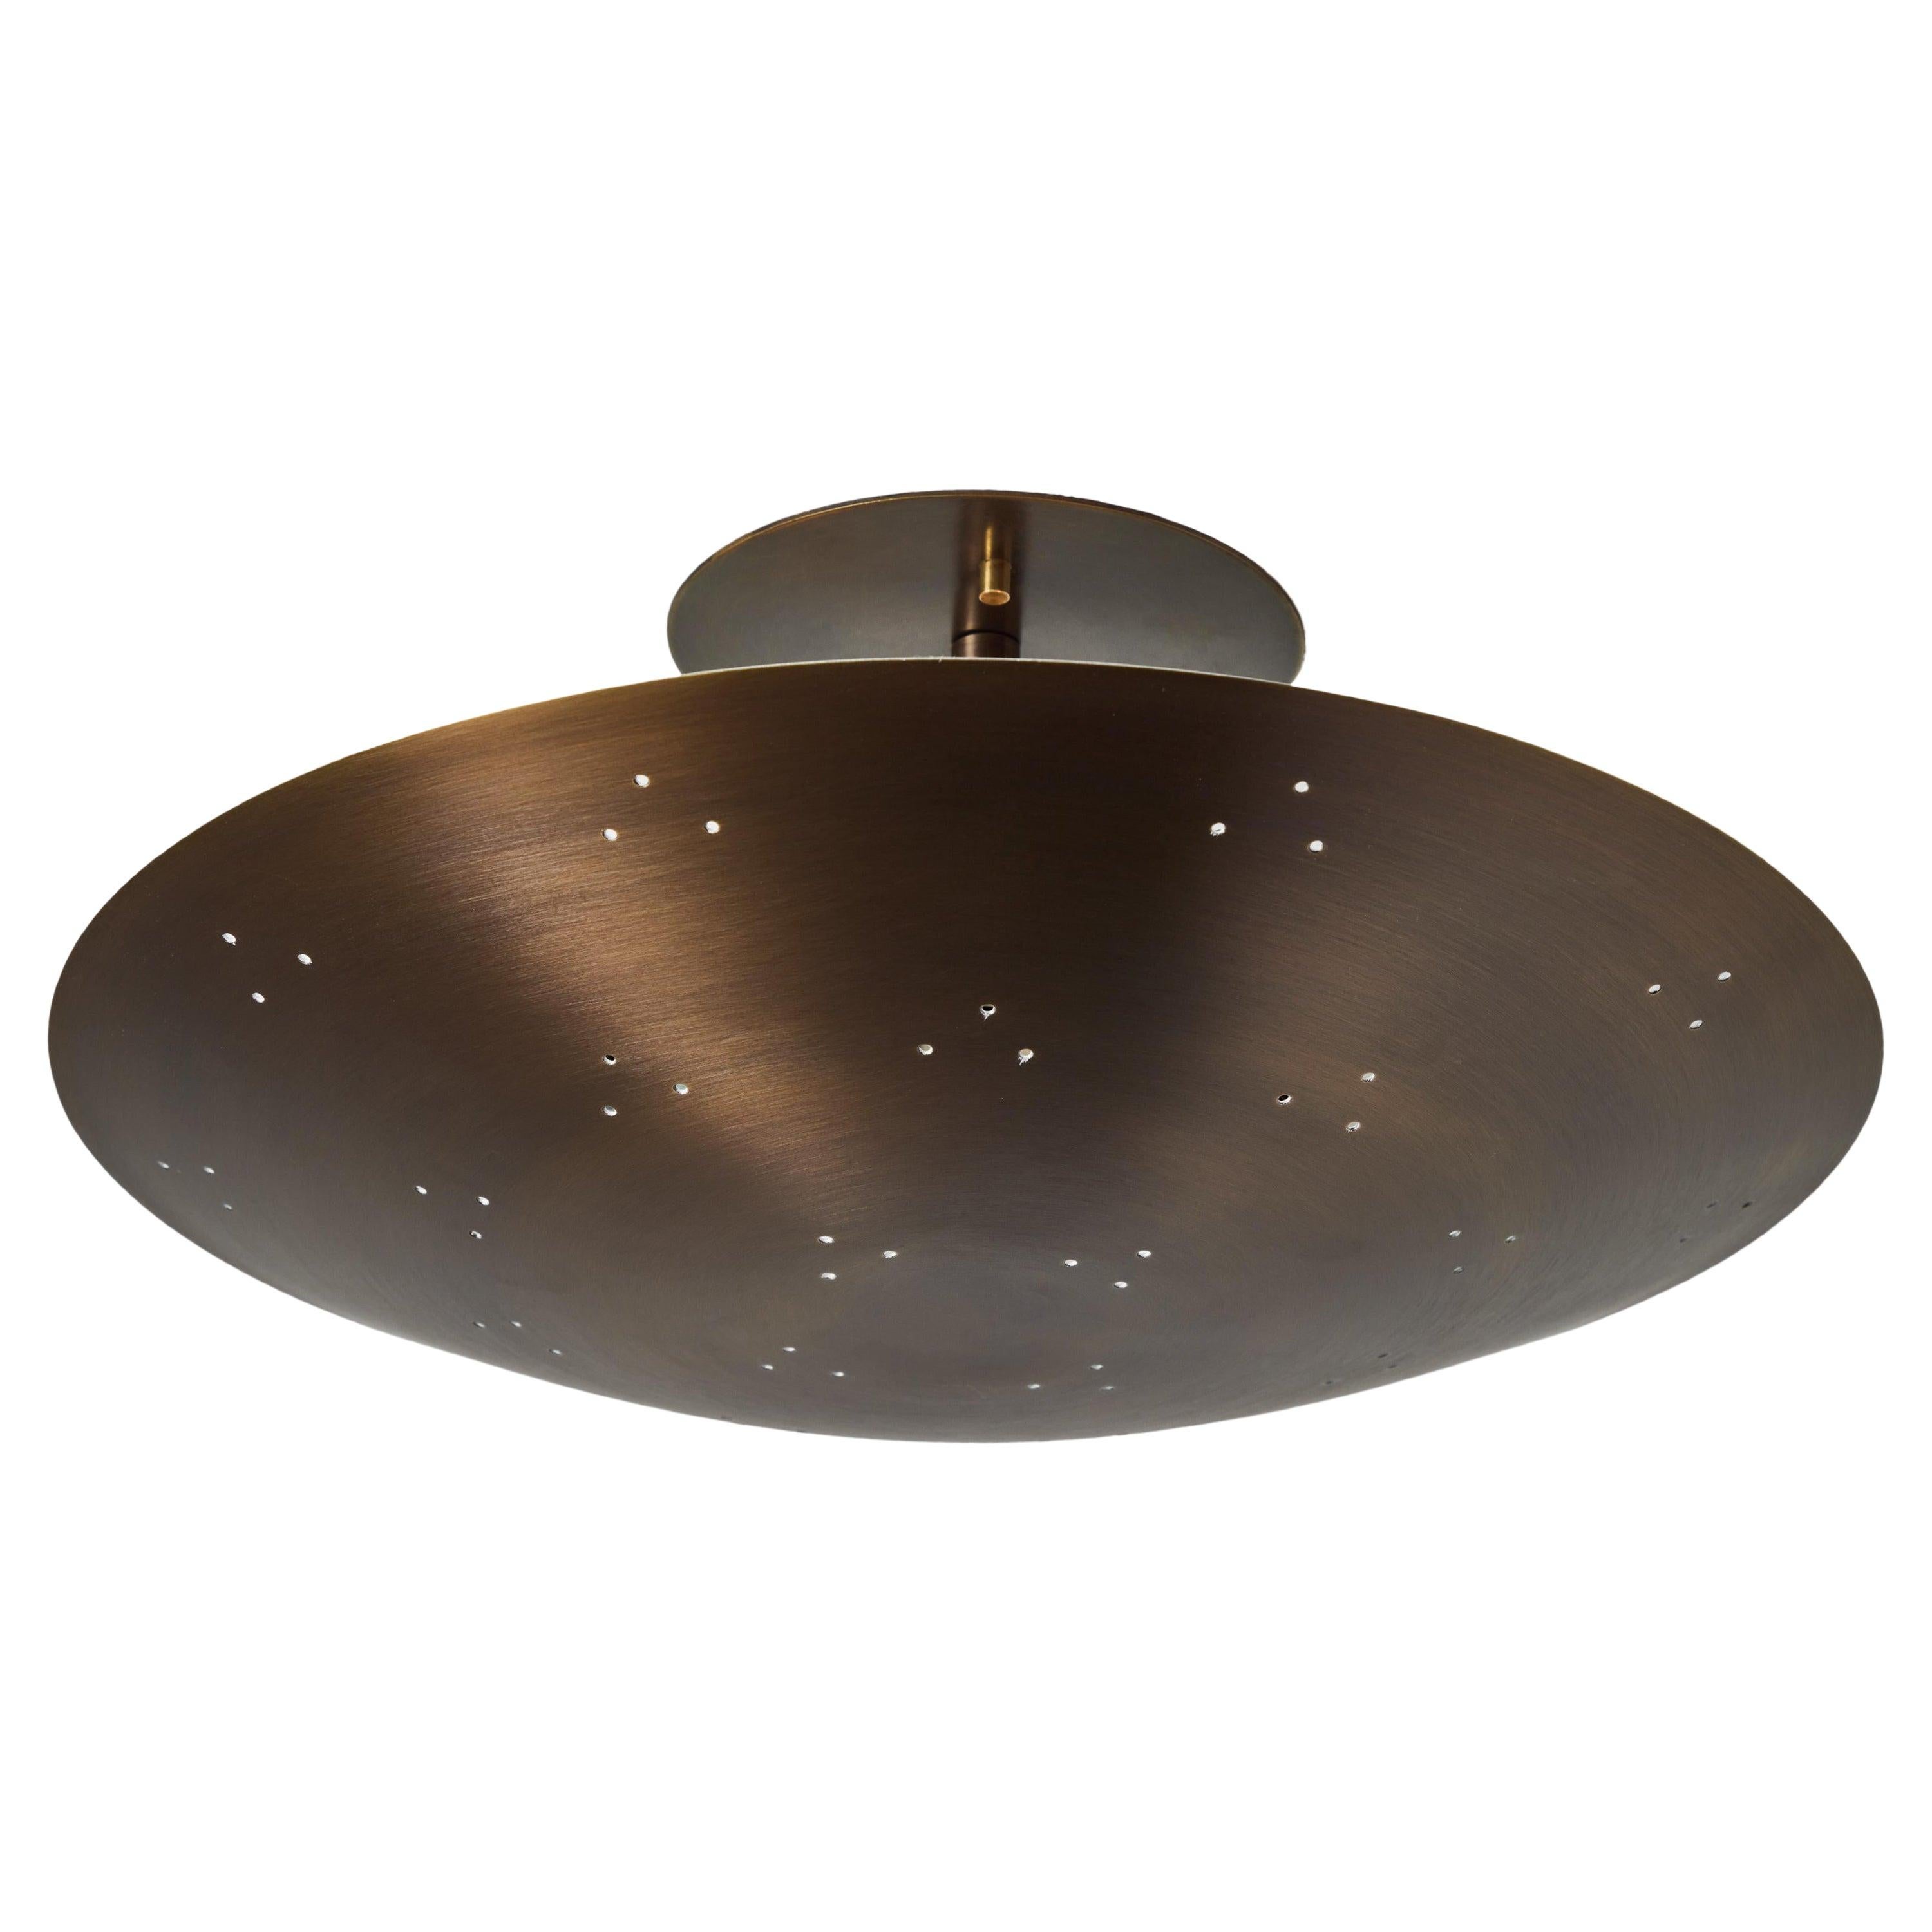 Two Enlighten 'Rey' Perforated Brass Dome Ceiling Lamp For Sale 2